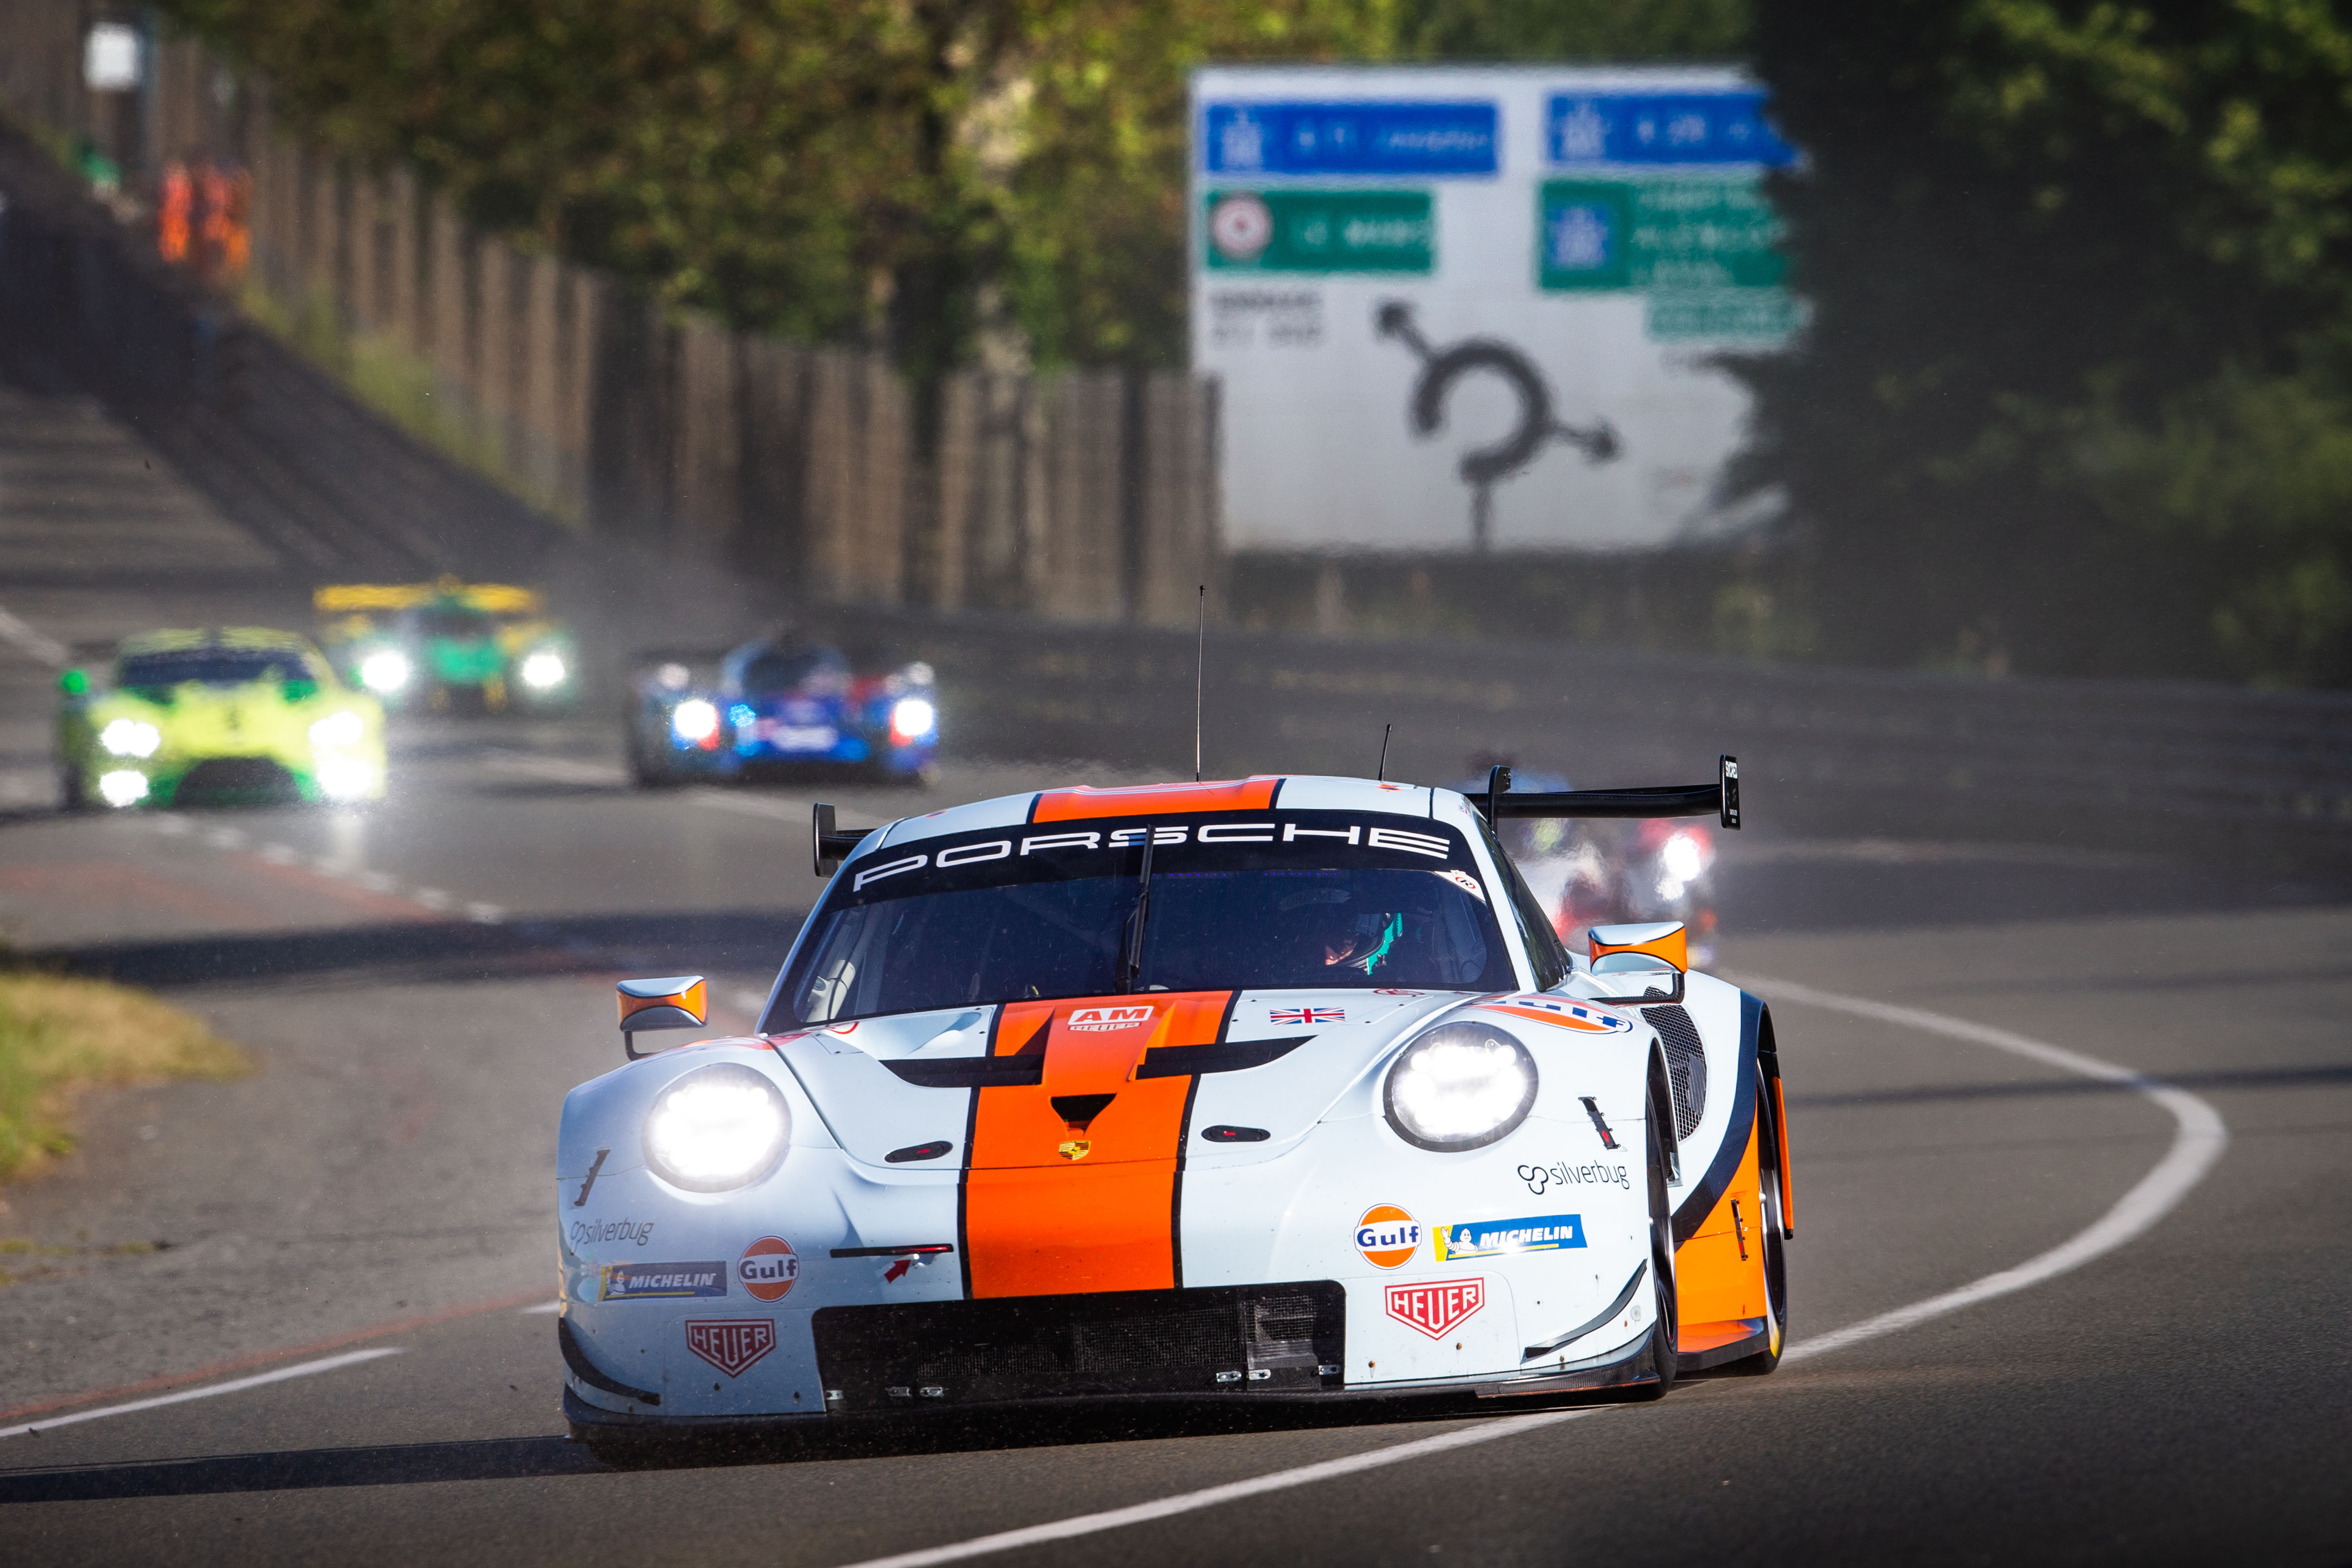 A Fans Guide To The 2019 24 Hours Of Le Mans The Porsche Perspective